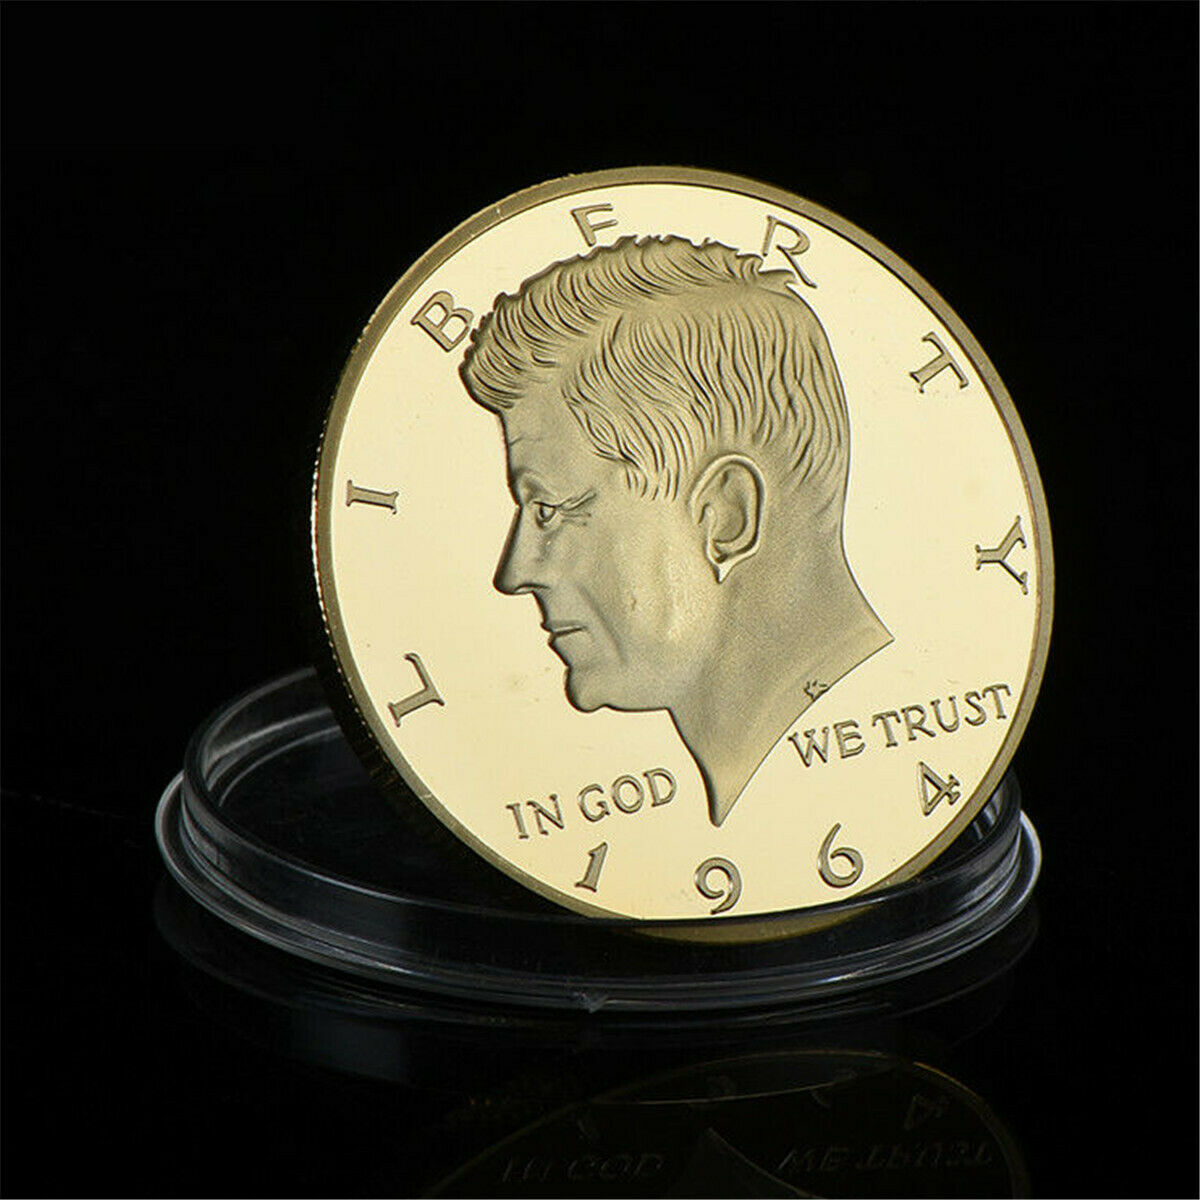 1964 Kennedy Half Dollar Gold Plated Commemorative Coin Size 40mm